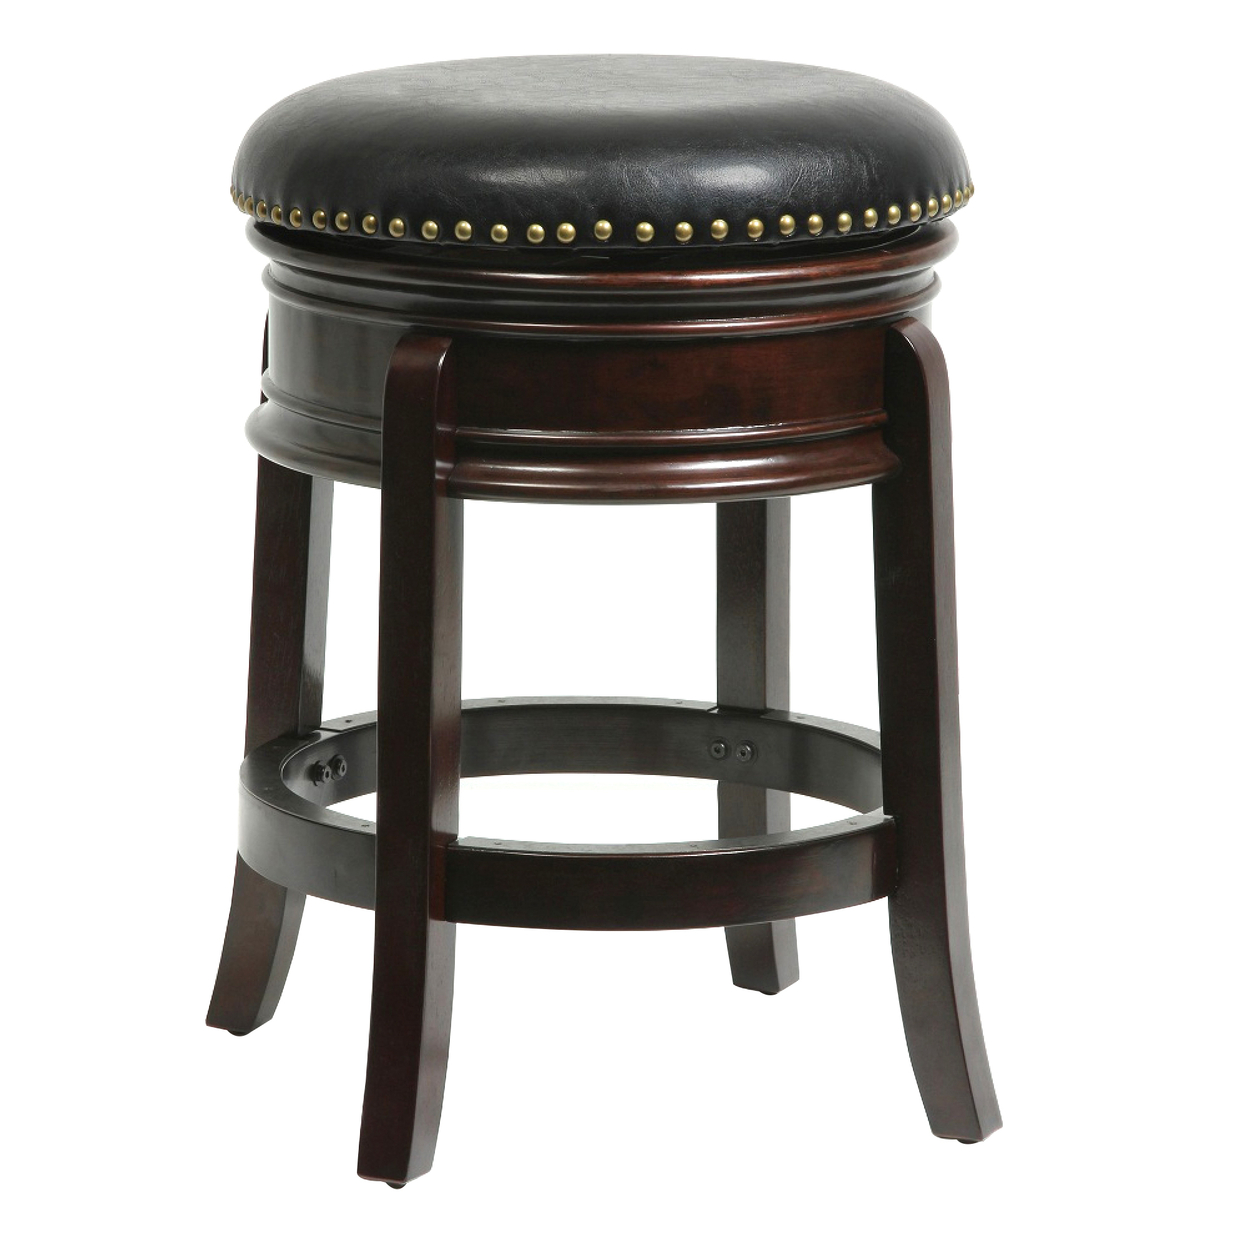 Sabi 24 Inch Swivel Counter Stool, Solid Wood, Faux Leather, Espresso Brown, Black